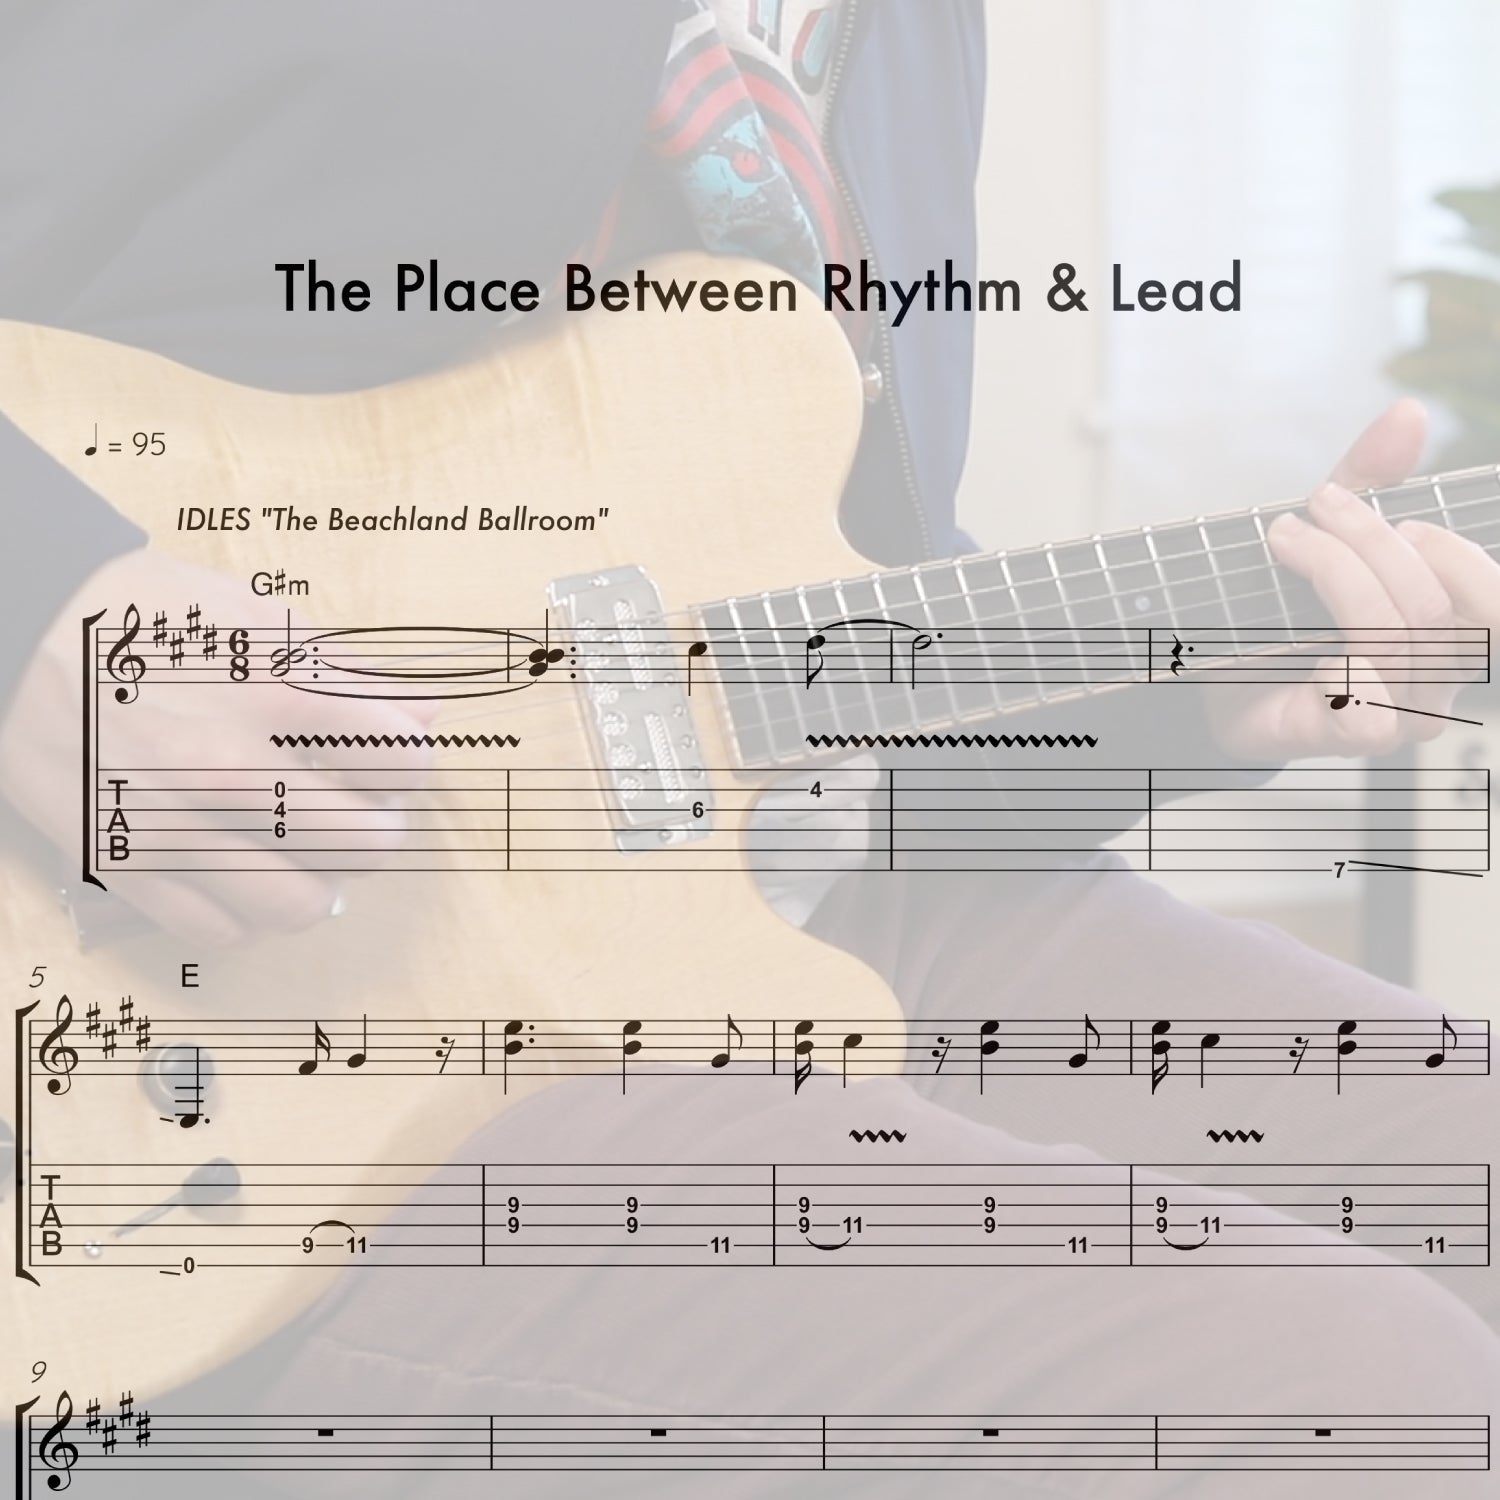 The Place Between Rhythm & Lead